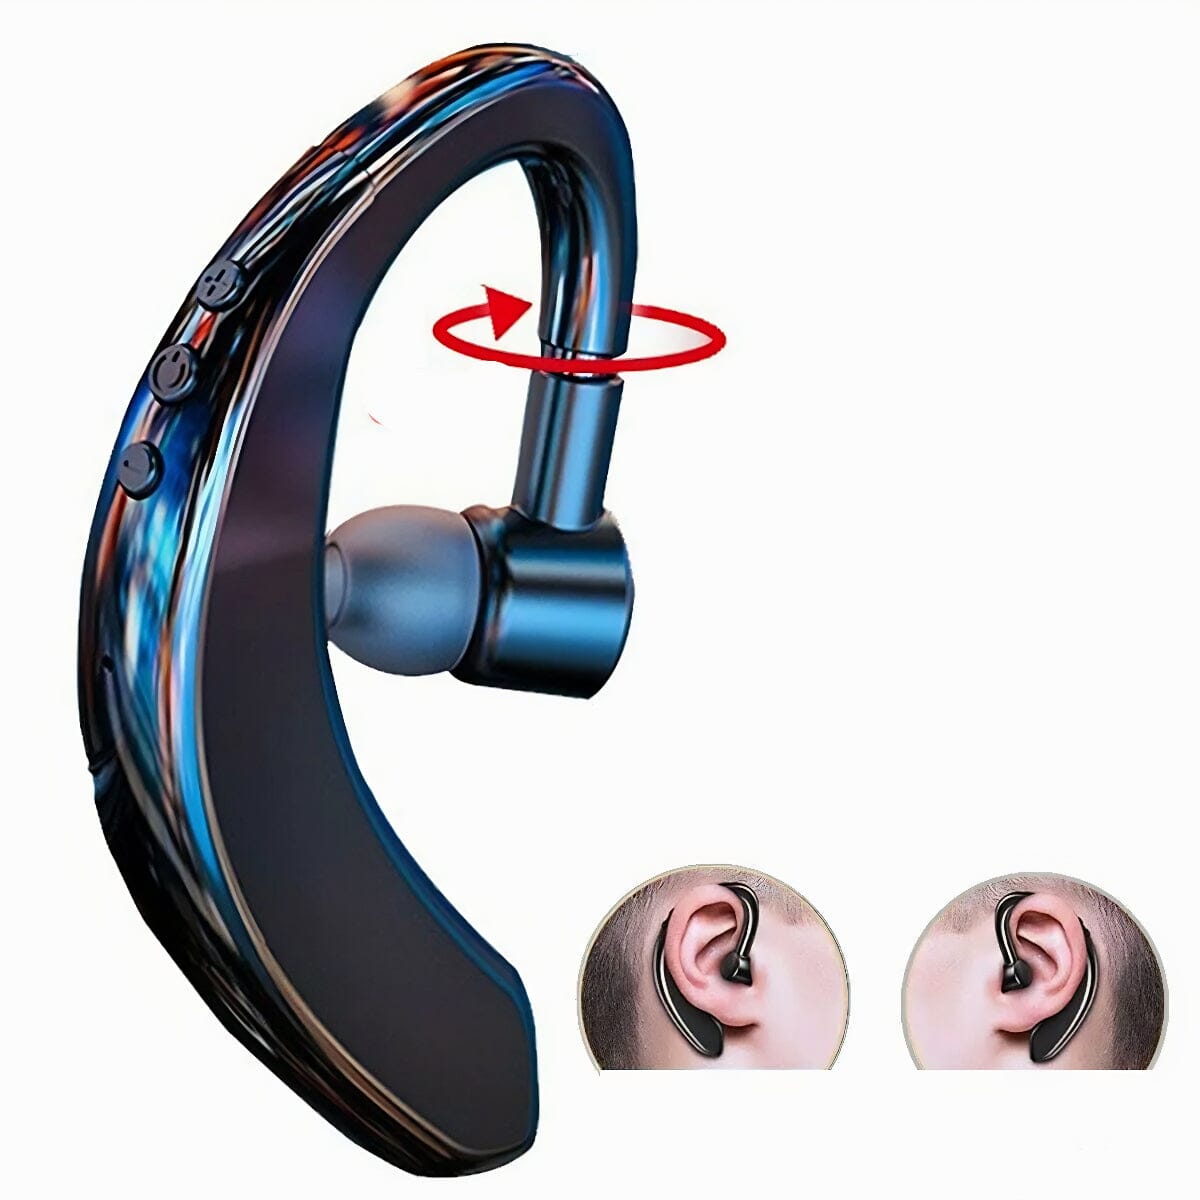 Bluetooth Headset For Cell Phone,bluetooth Wireless Earpiece Headset